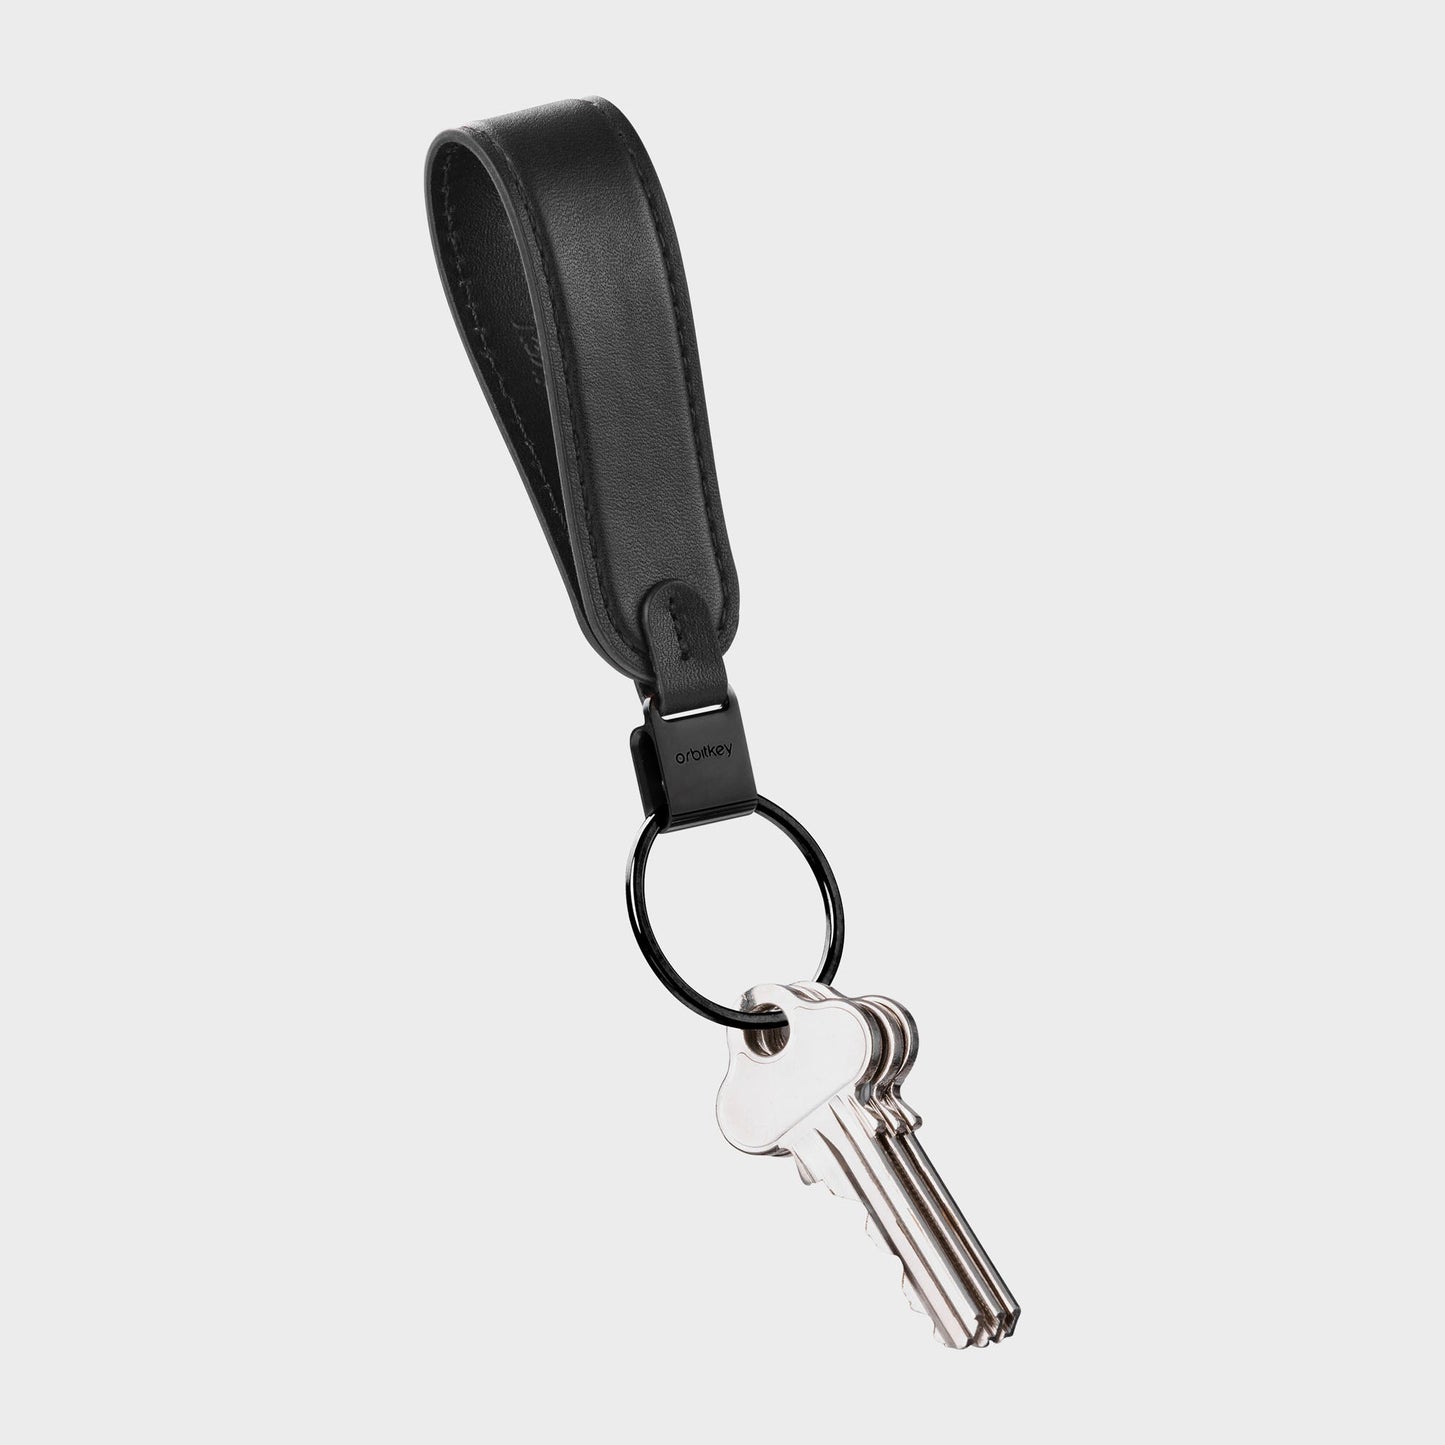 Tiuimk Silver Keychain Loop Kit - Perfect Solution for Organizing Keys -  Strong and Long-Lasting